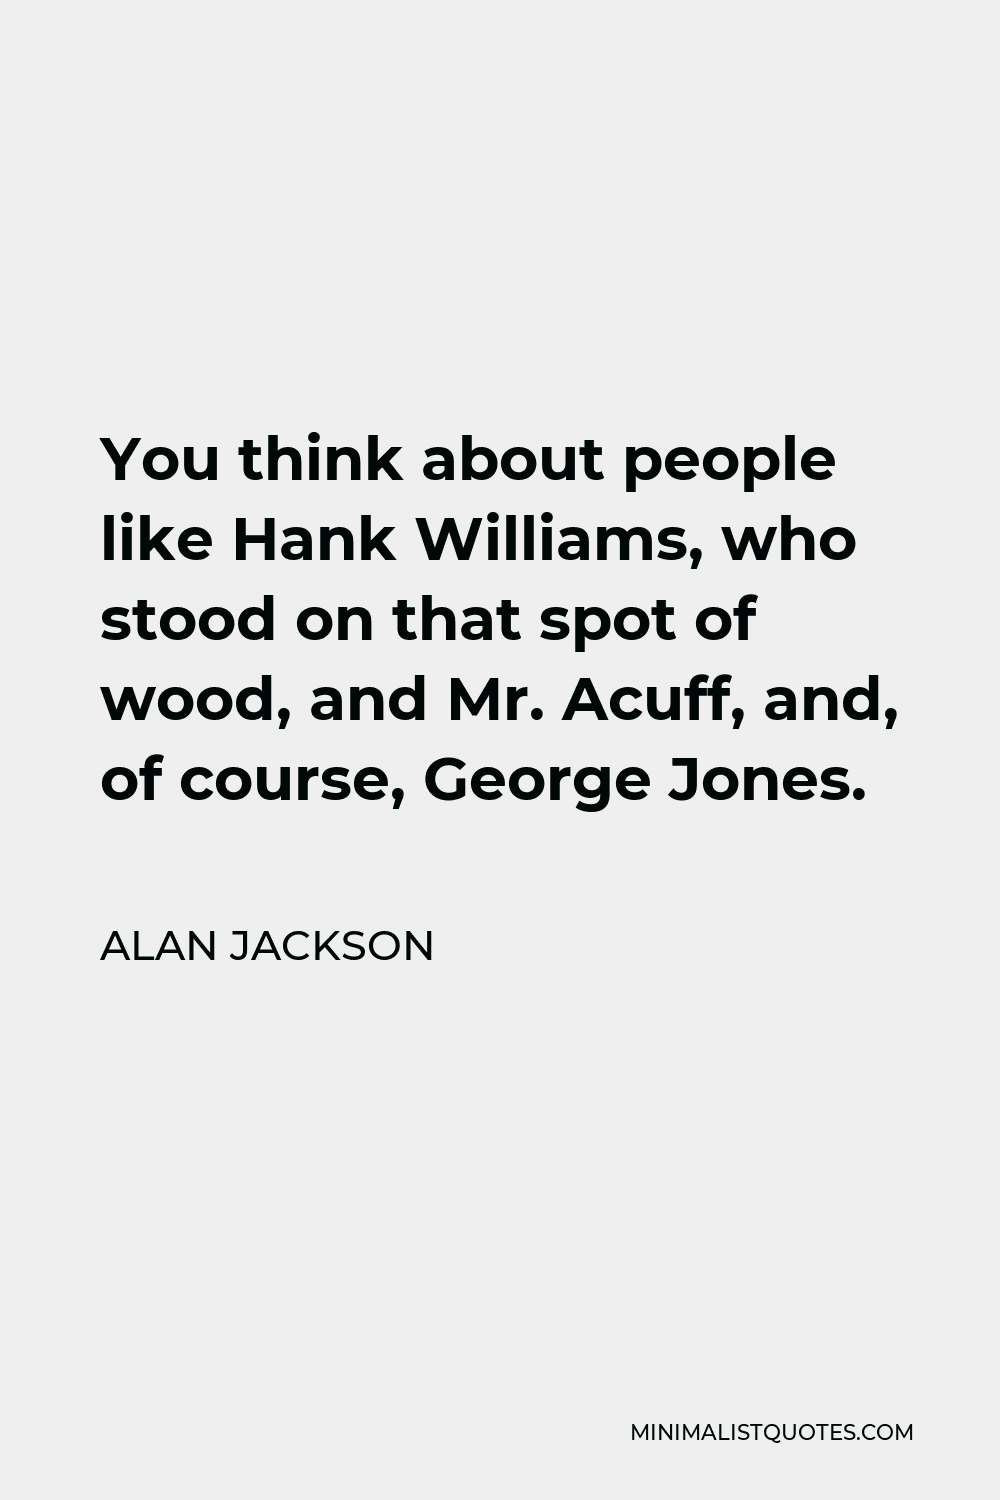 Alan Jackson Quote - You think about people like Hank Williams, who stood on that spot of wood, and Mr. Acuff, and, of course, George Jones.